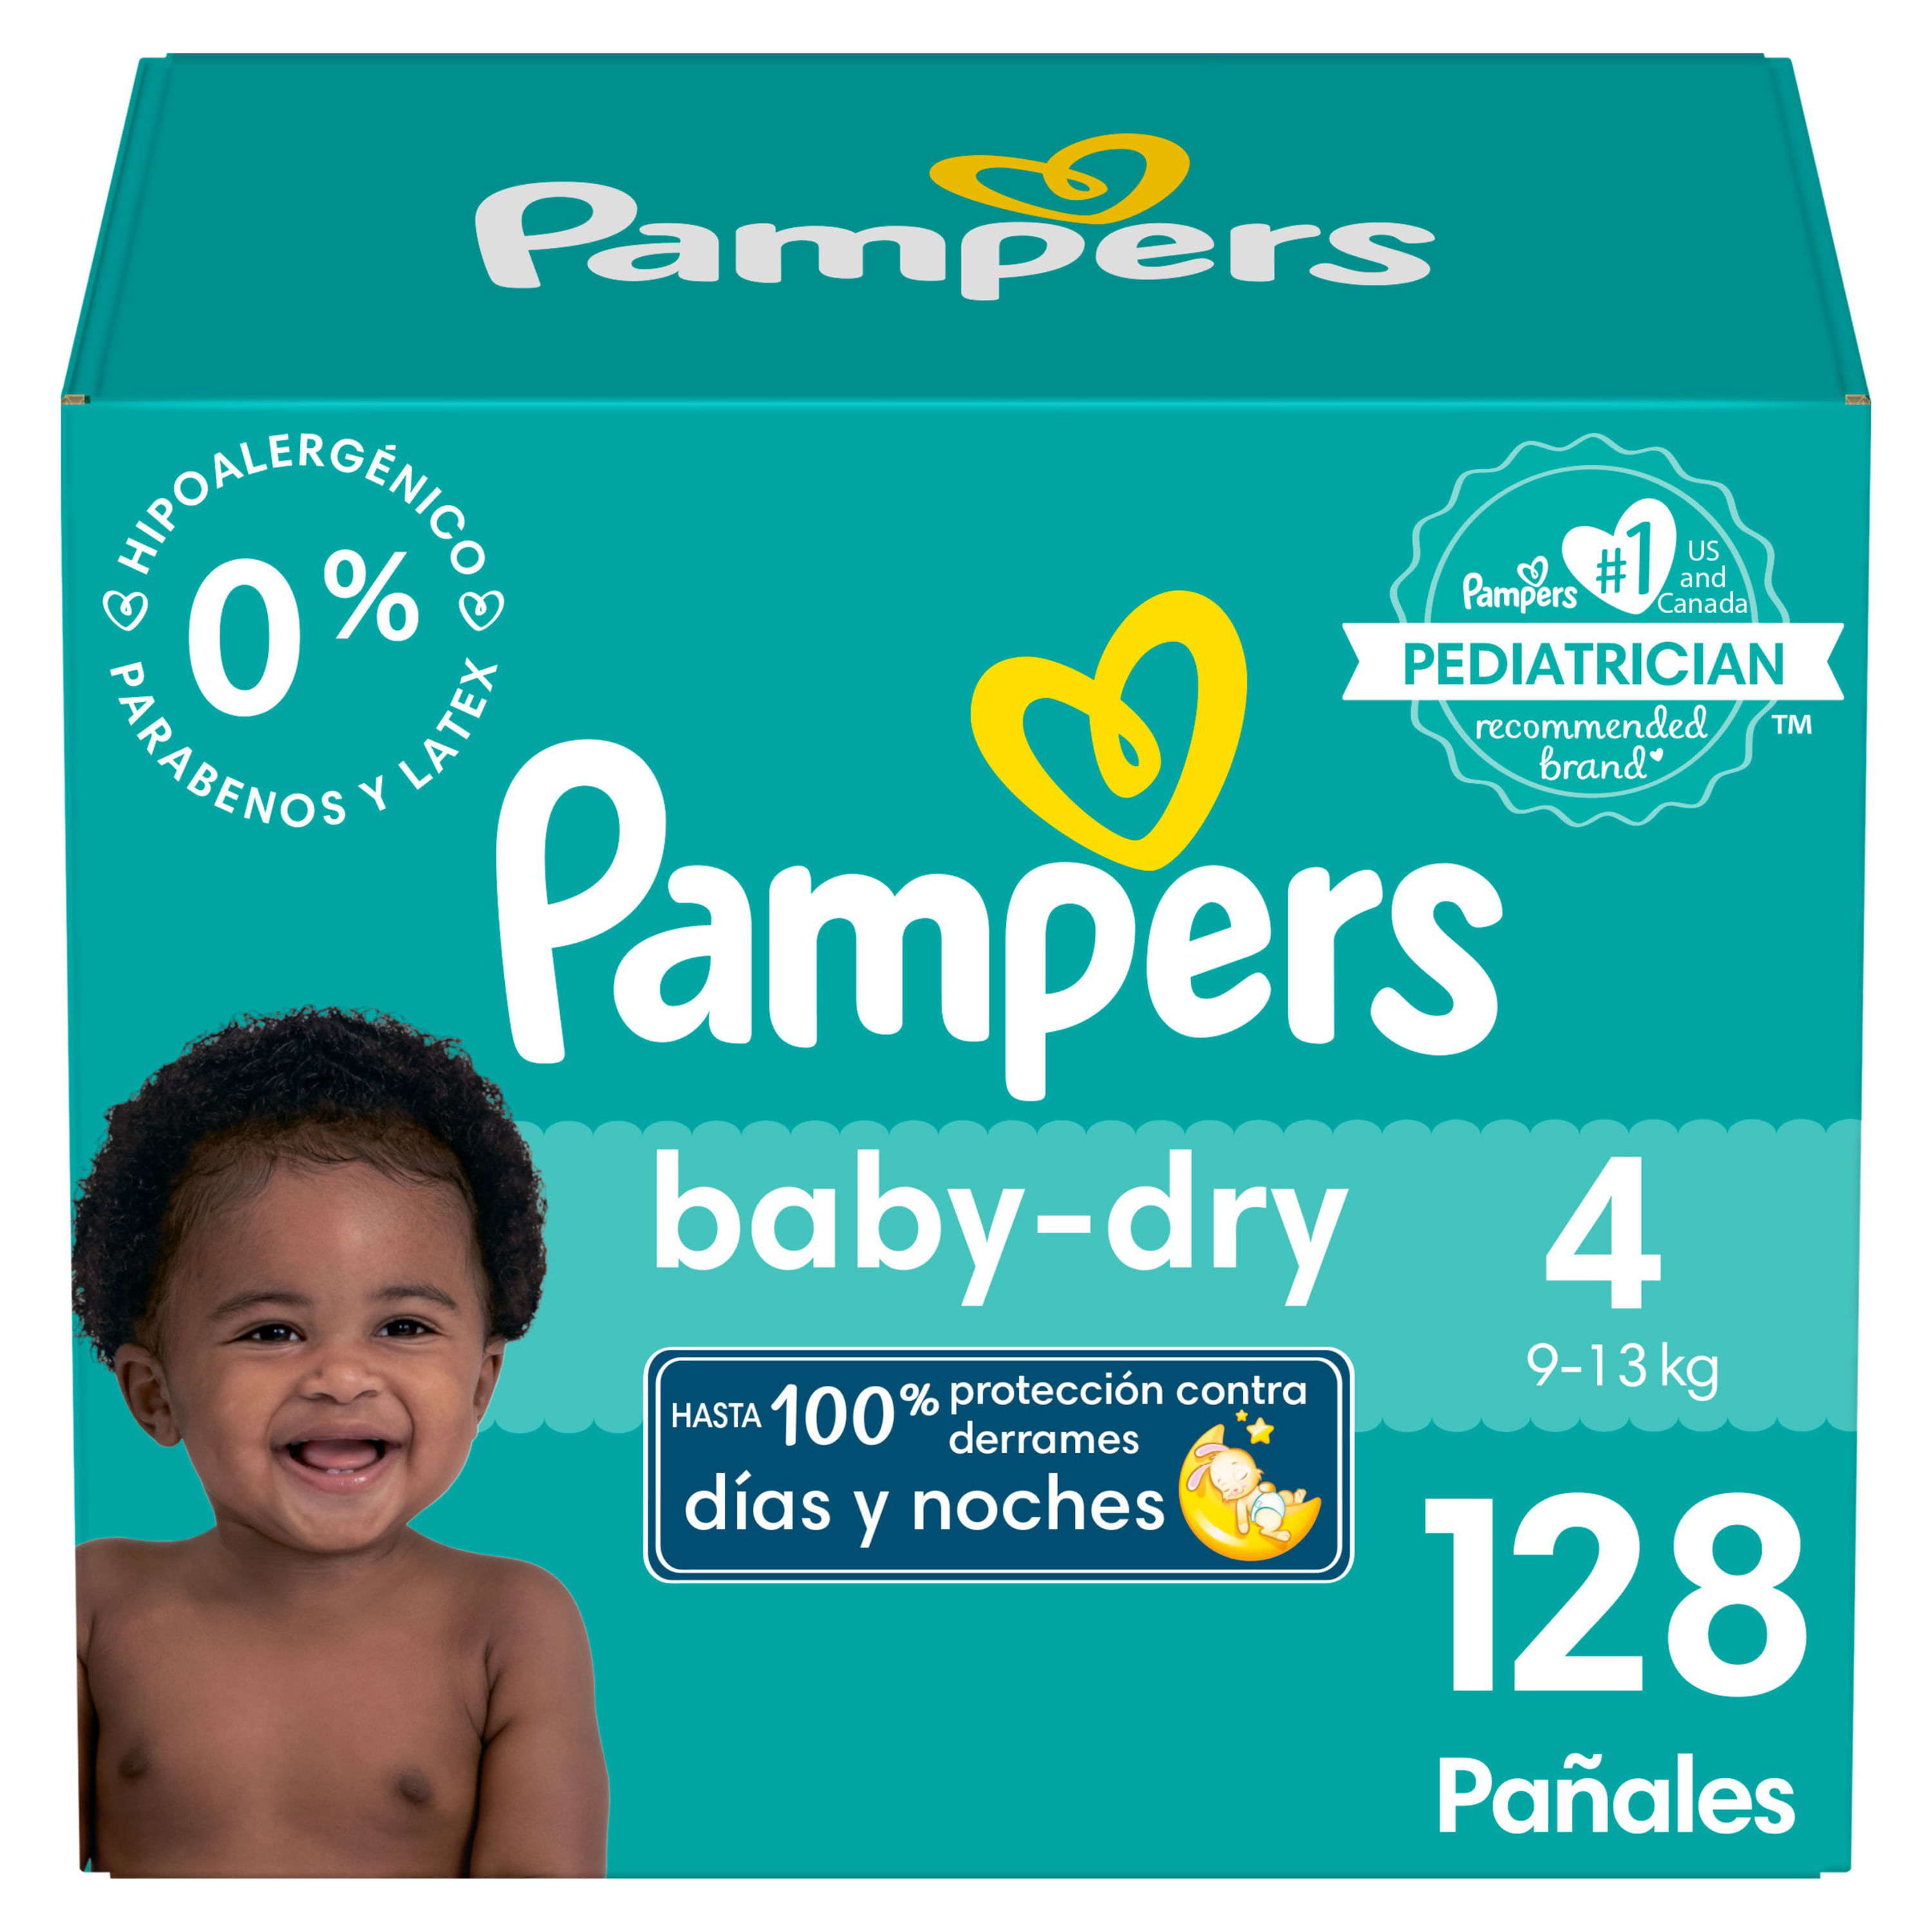 Pampers Pañales Baby-Dry, talla 4, 9-14kg, Maxi Pack (1 x 106 pañales) 